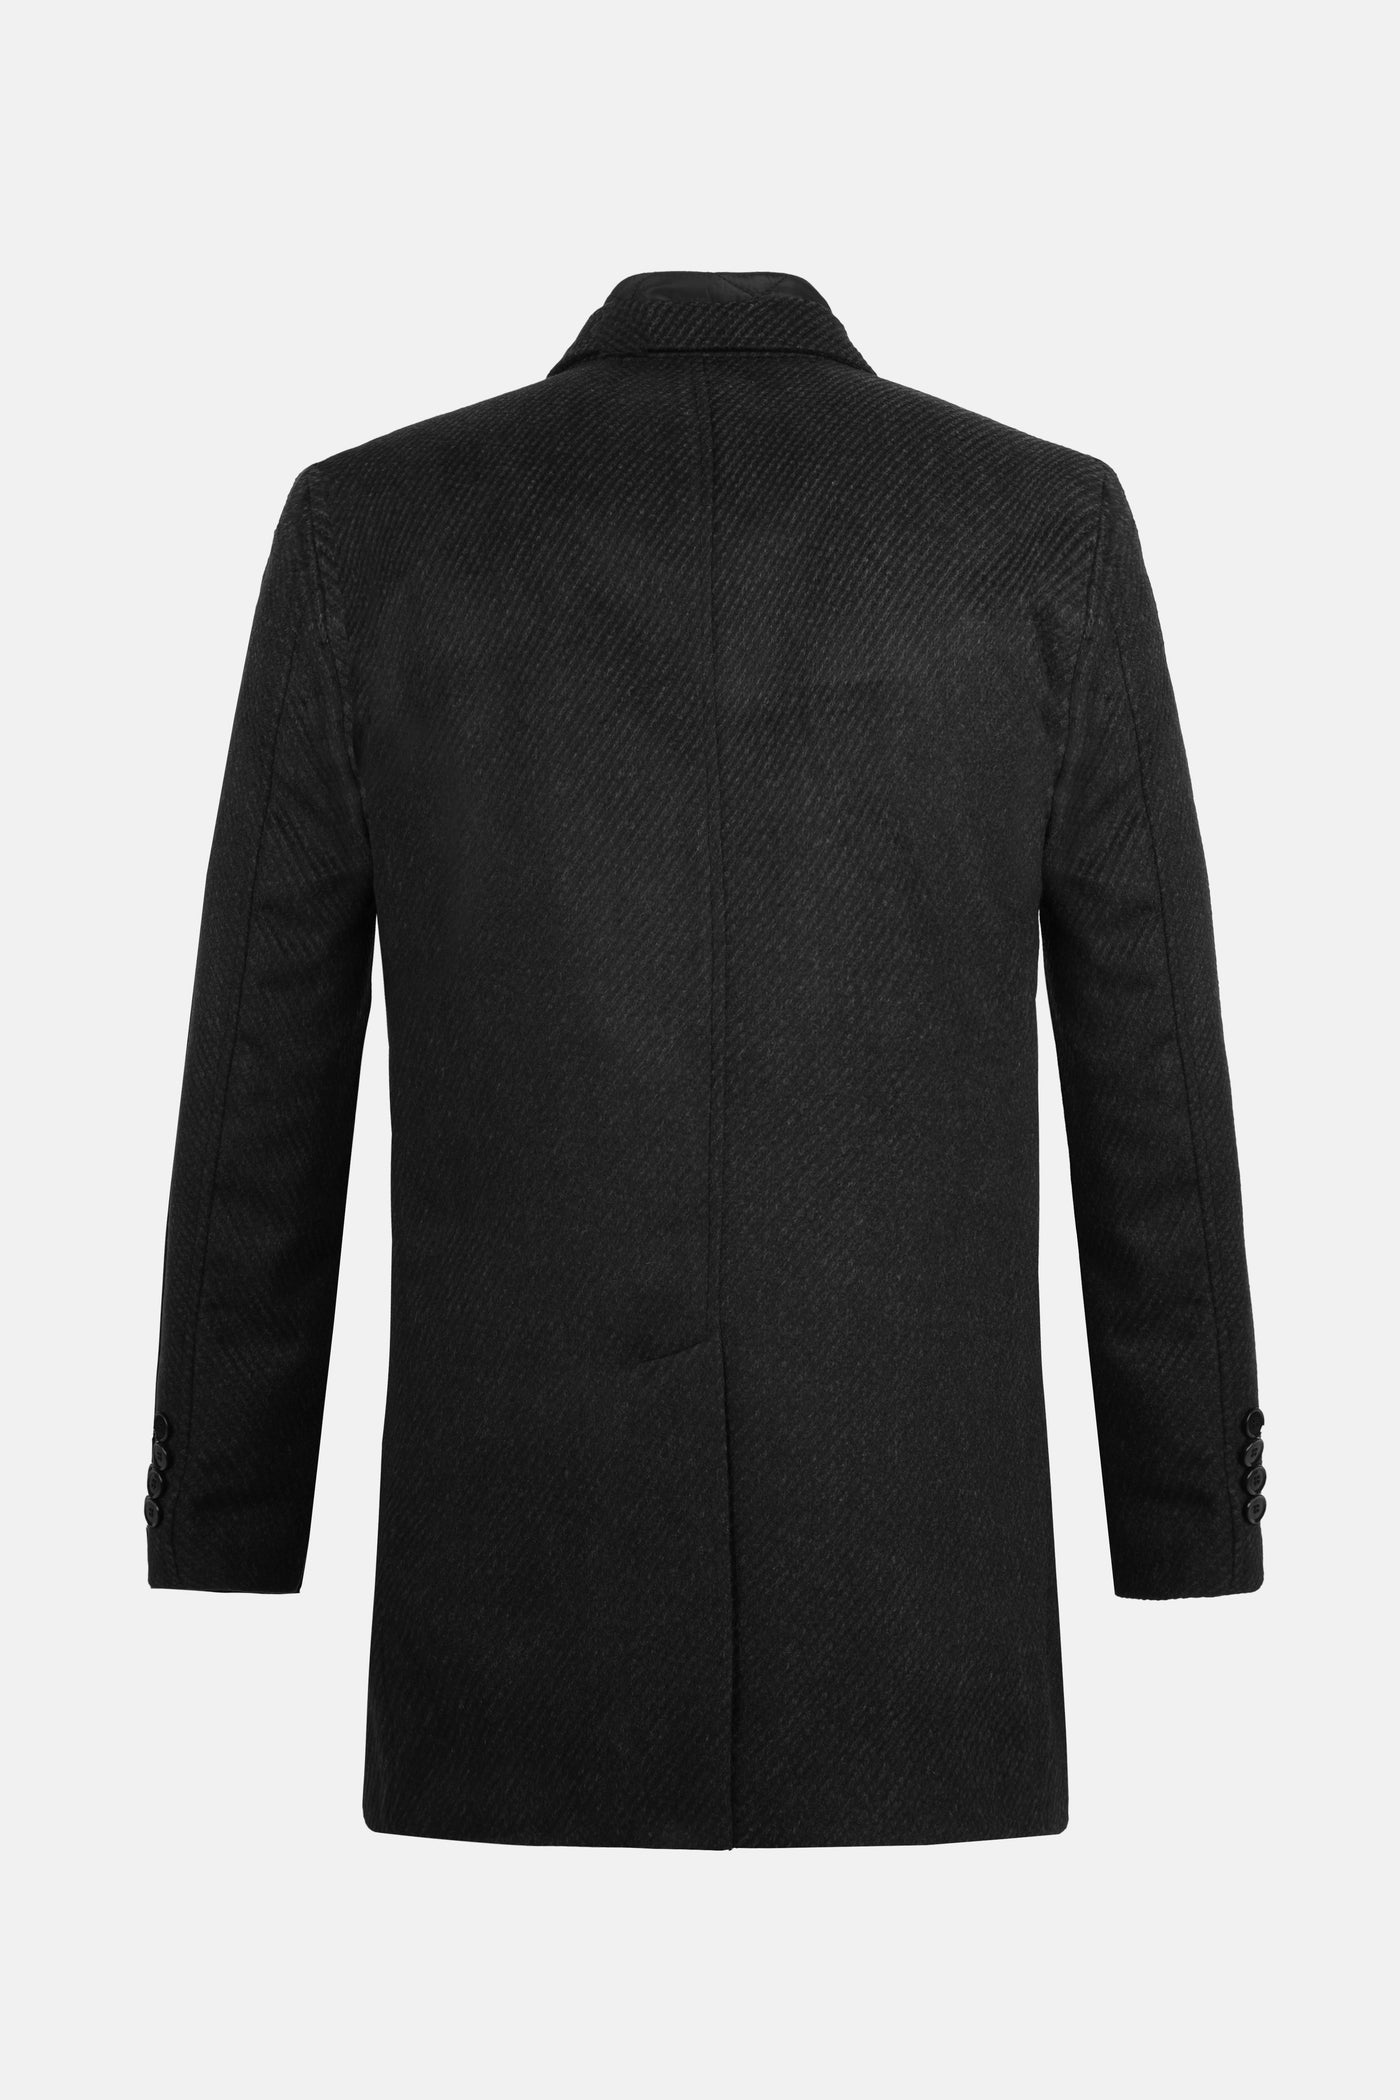 Jacquard Dark Gray & Black Woven wide lapel Coat with removable padded piece